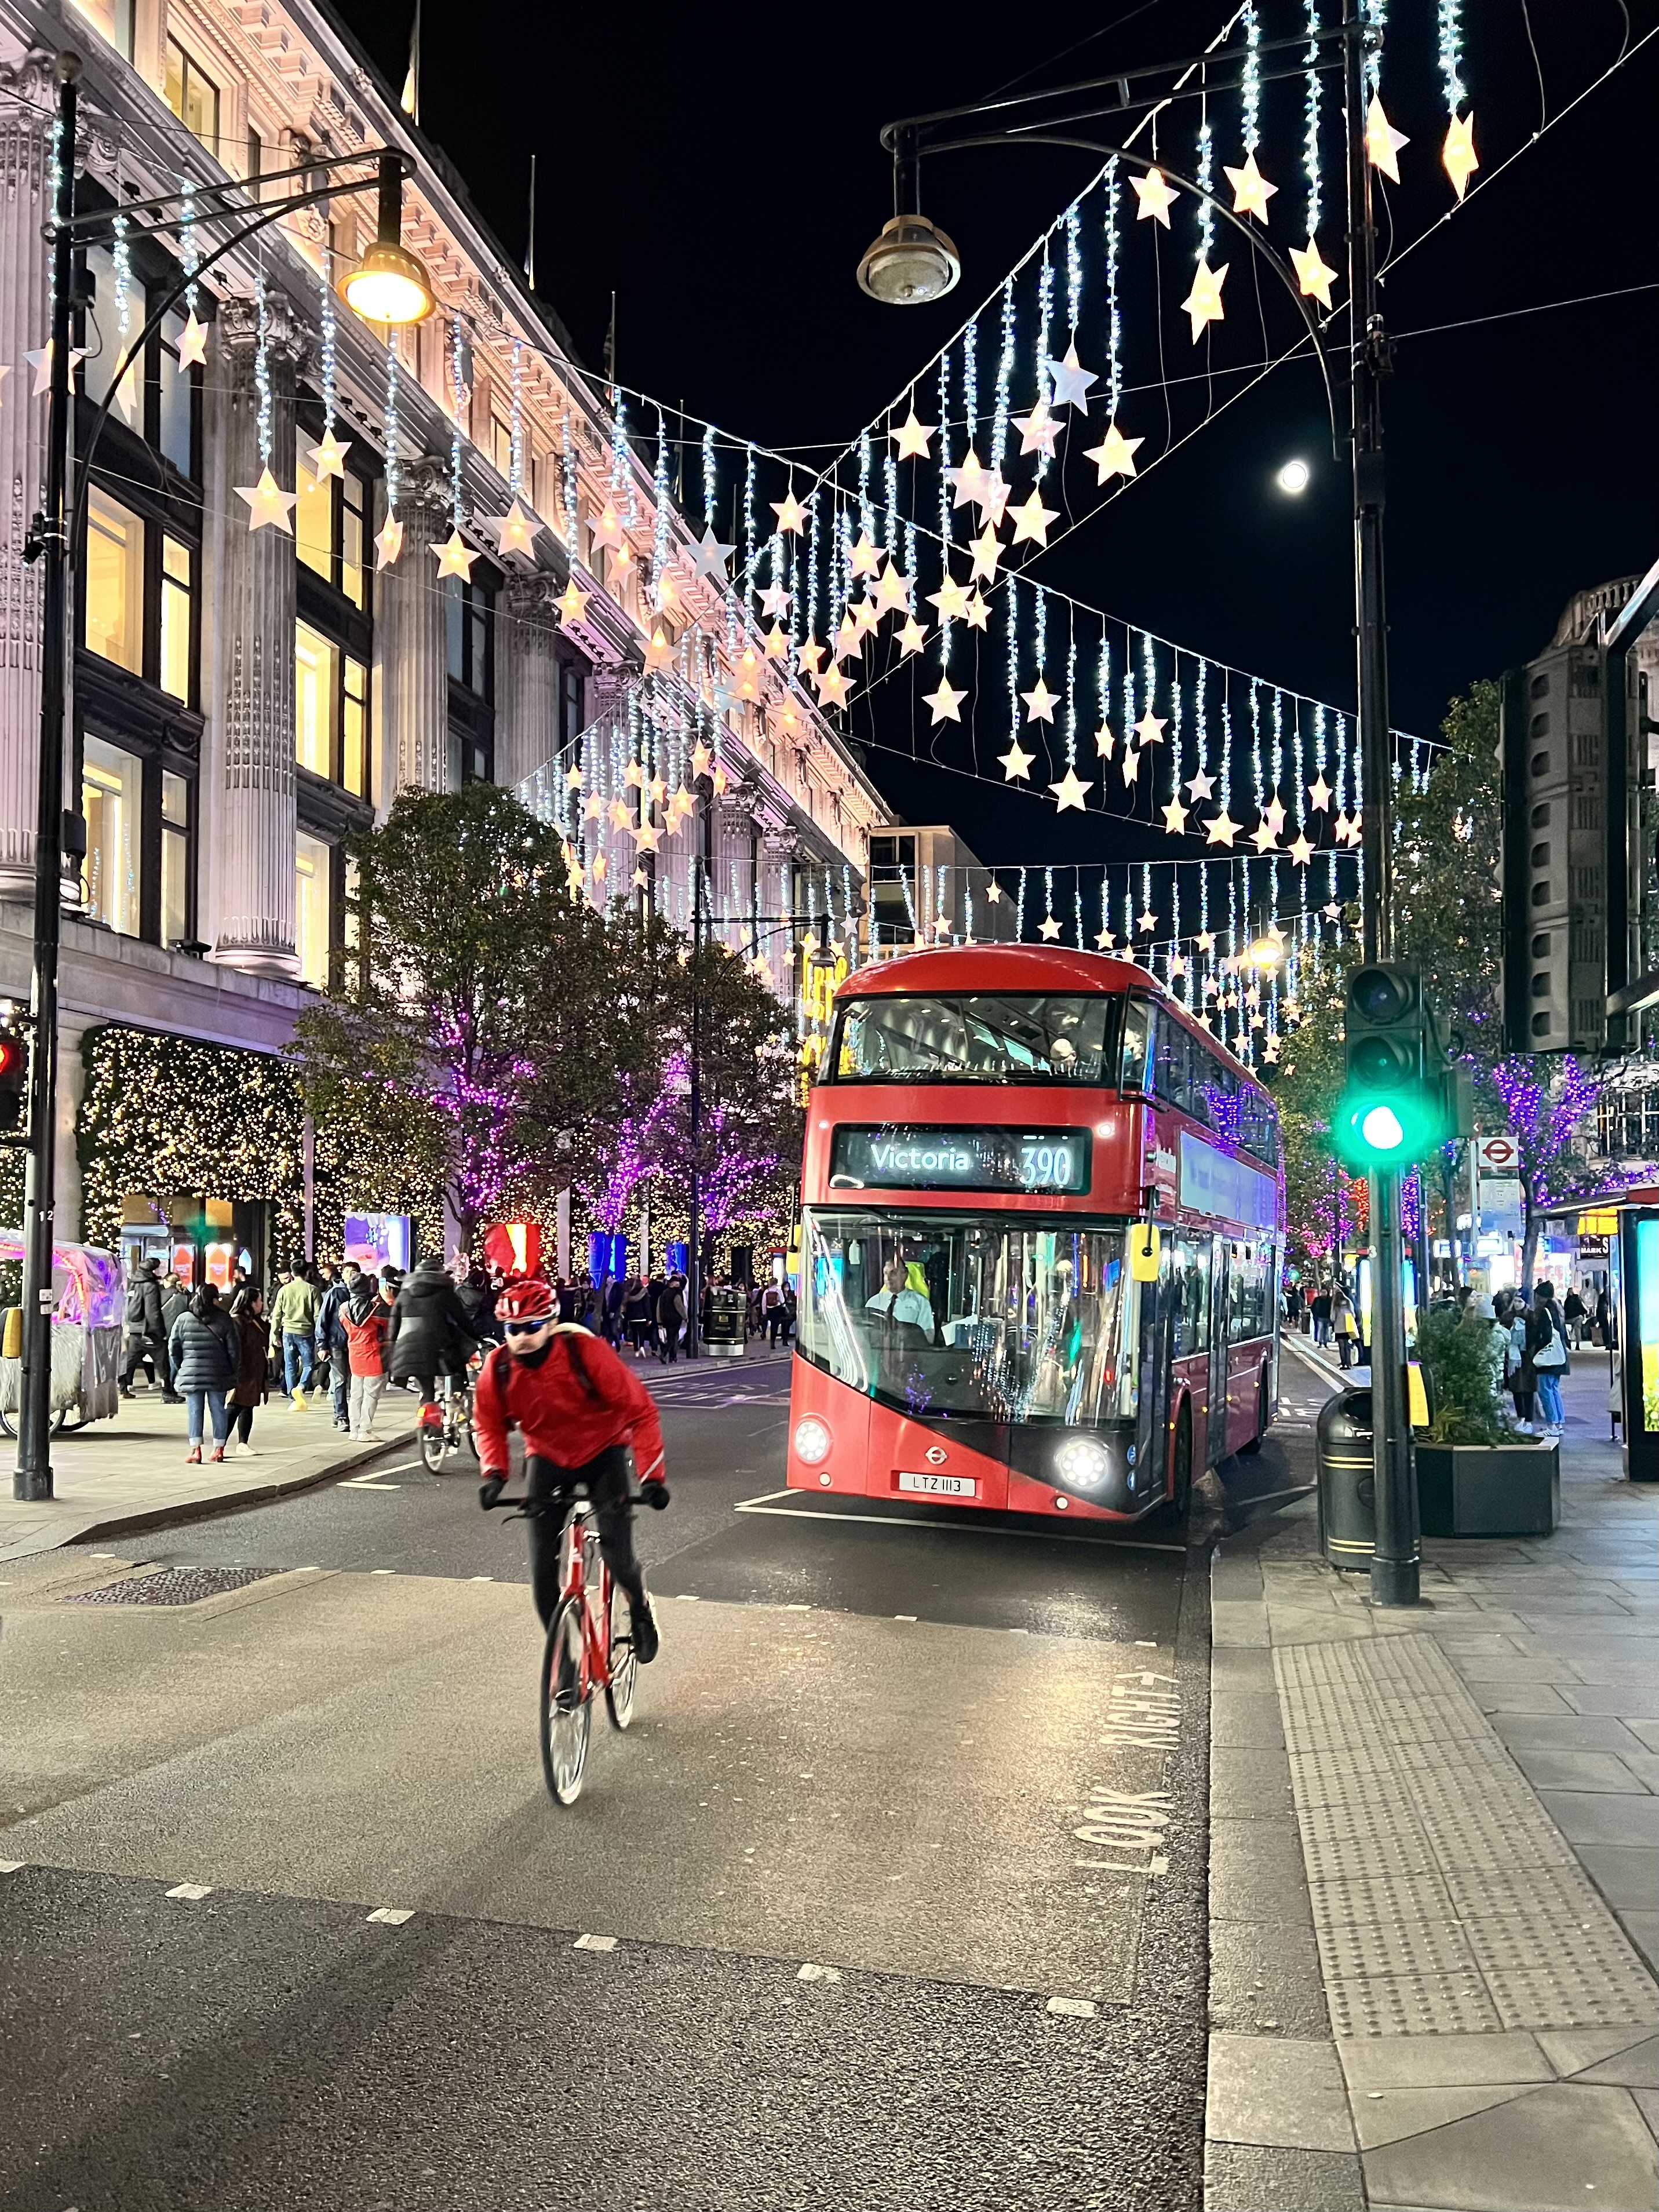 Christmas lights in London: holiday lights in Oxford Street